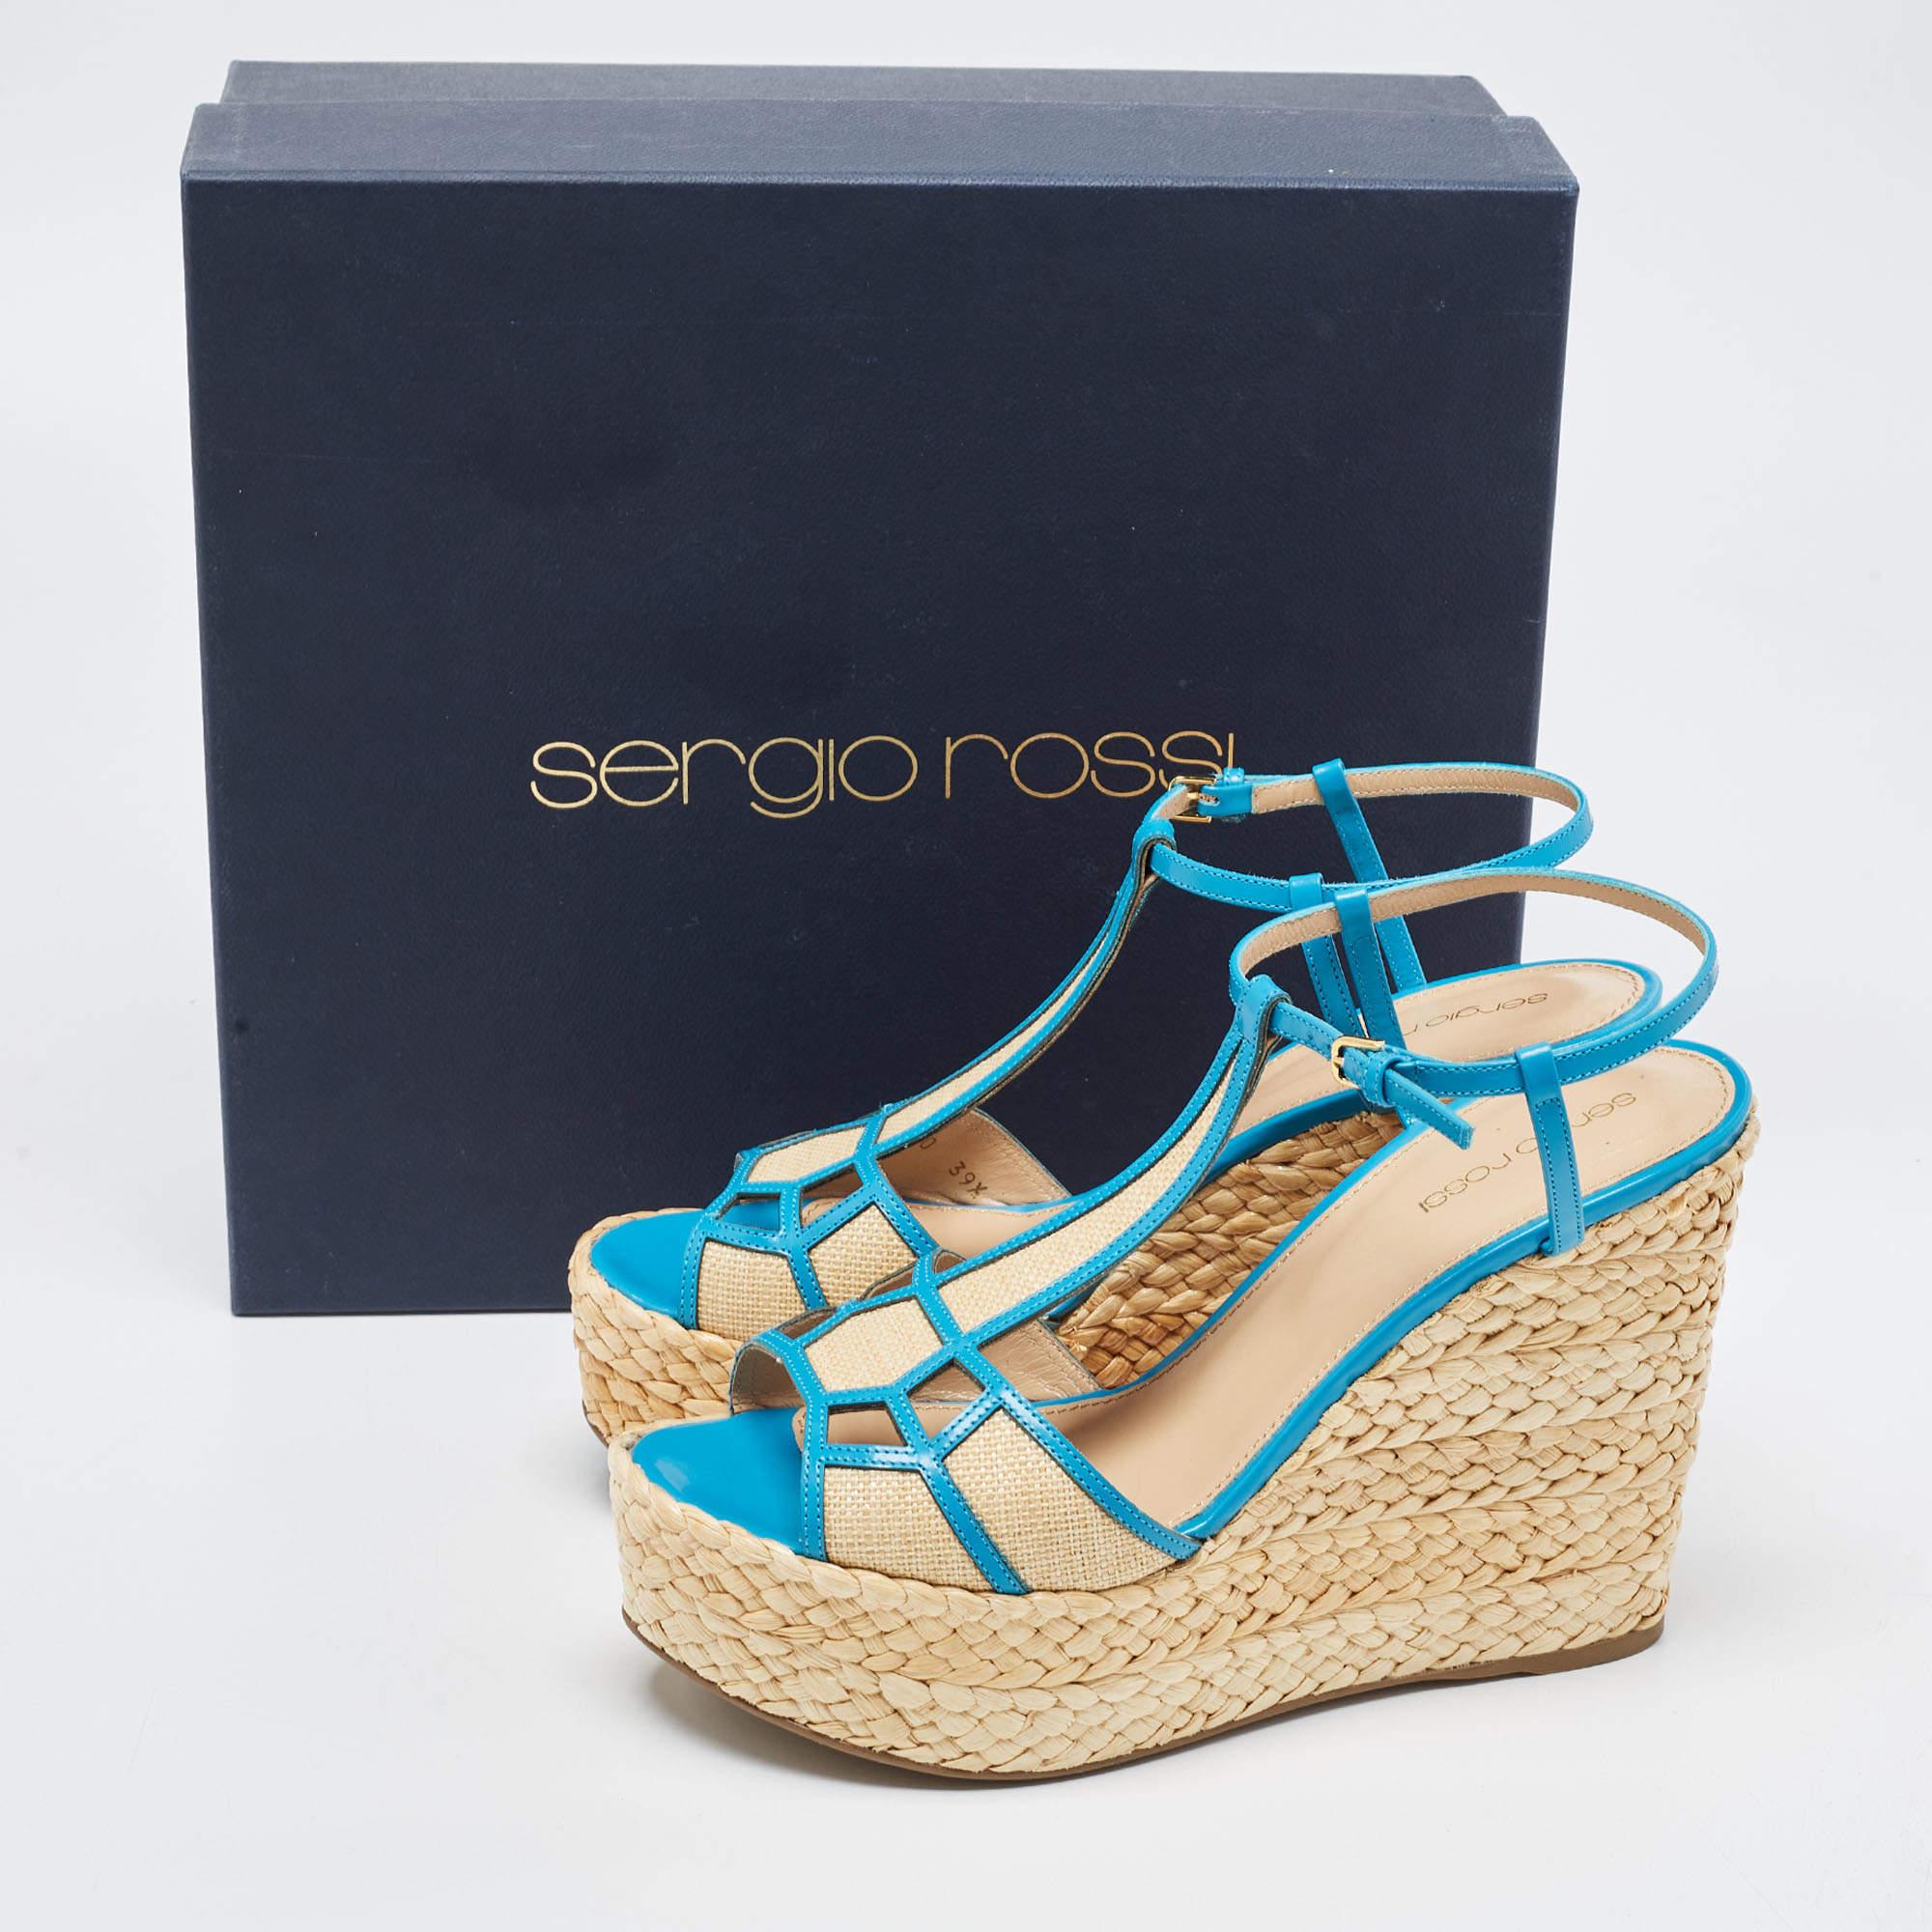 Sergio Rossi Blue/Beige Leather and Raffia Ankle Strap Espadrille Wedge Sandals  3